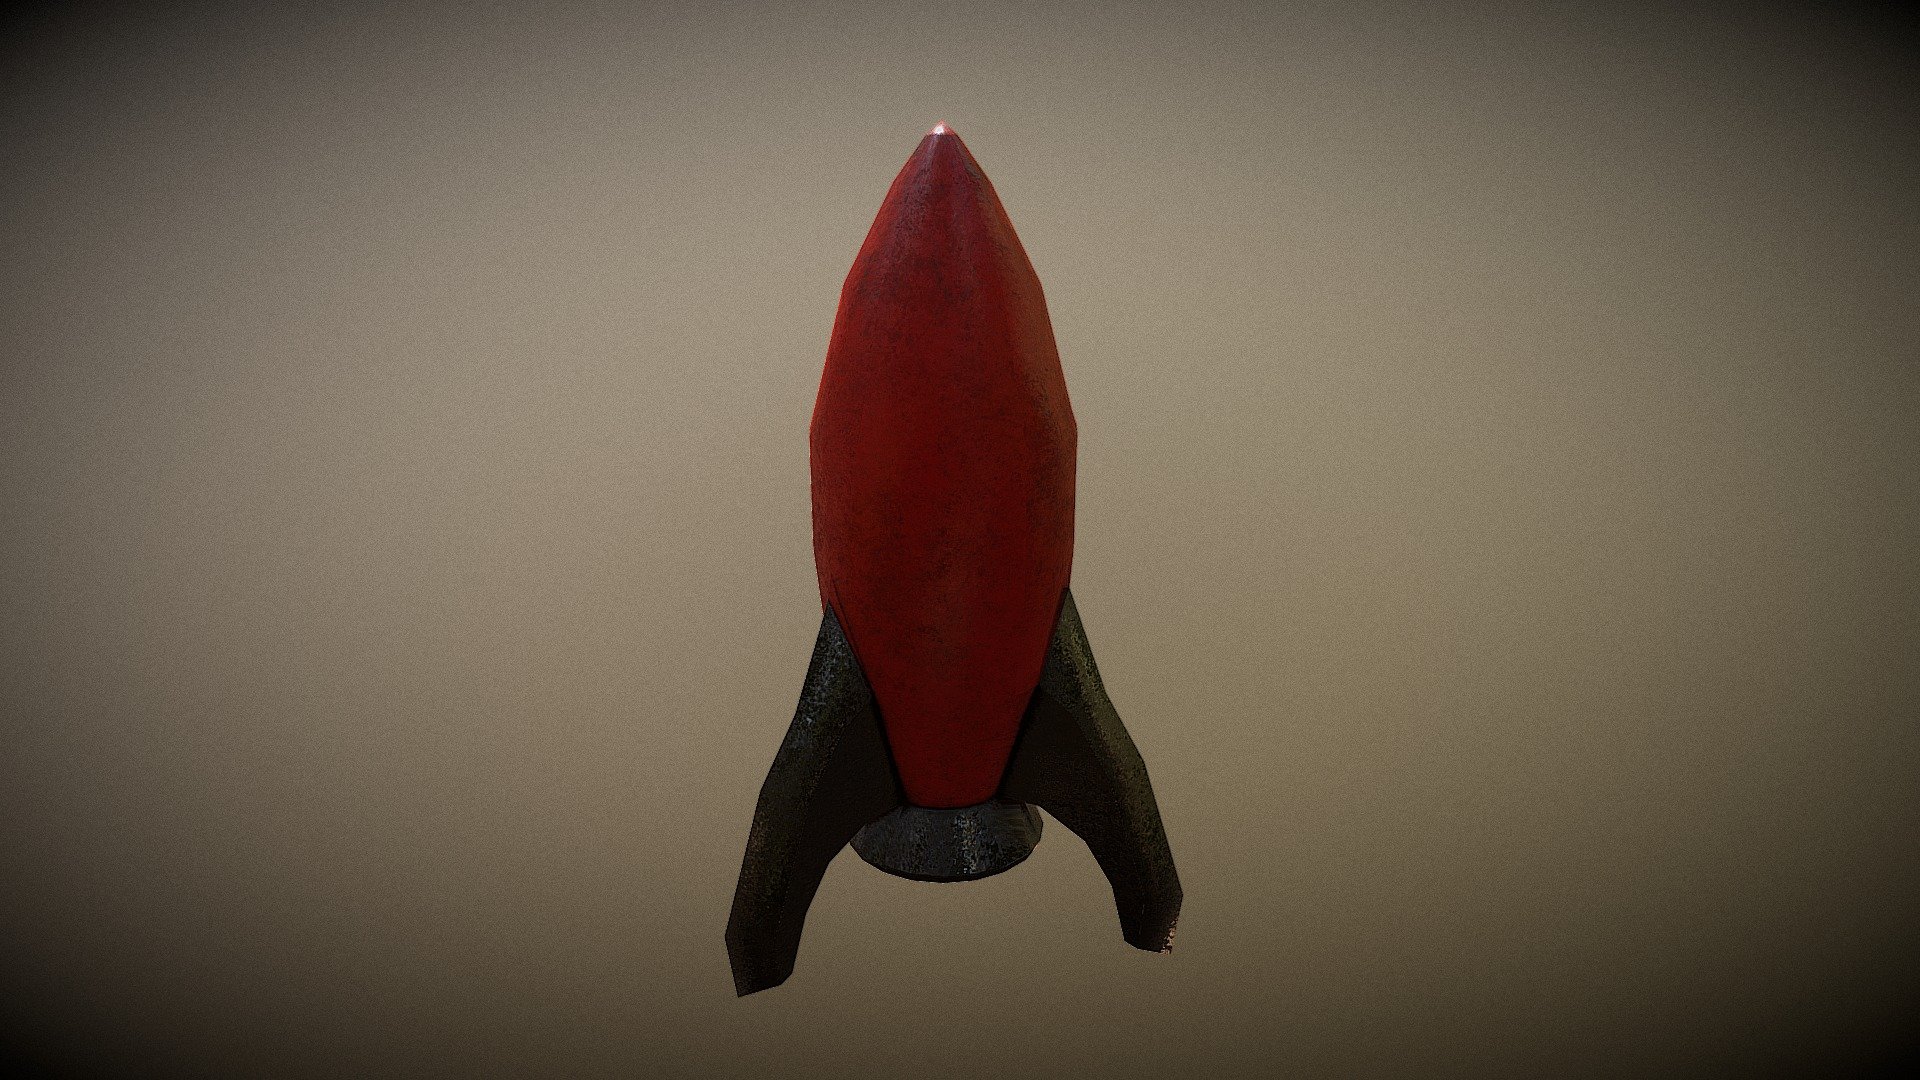 Ship the Red Rocket